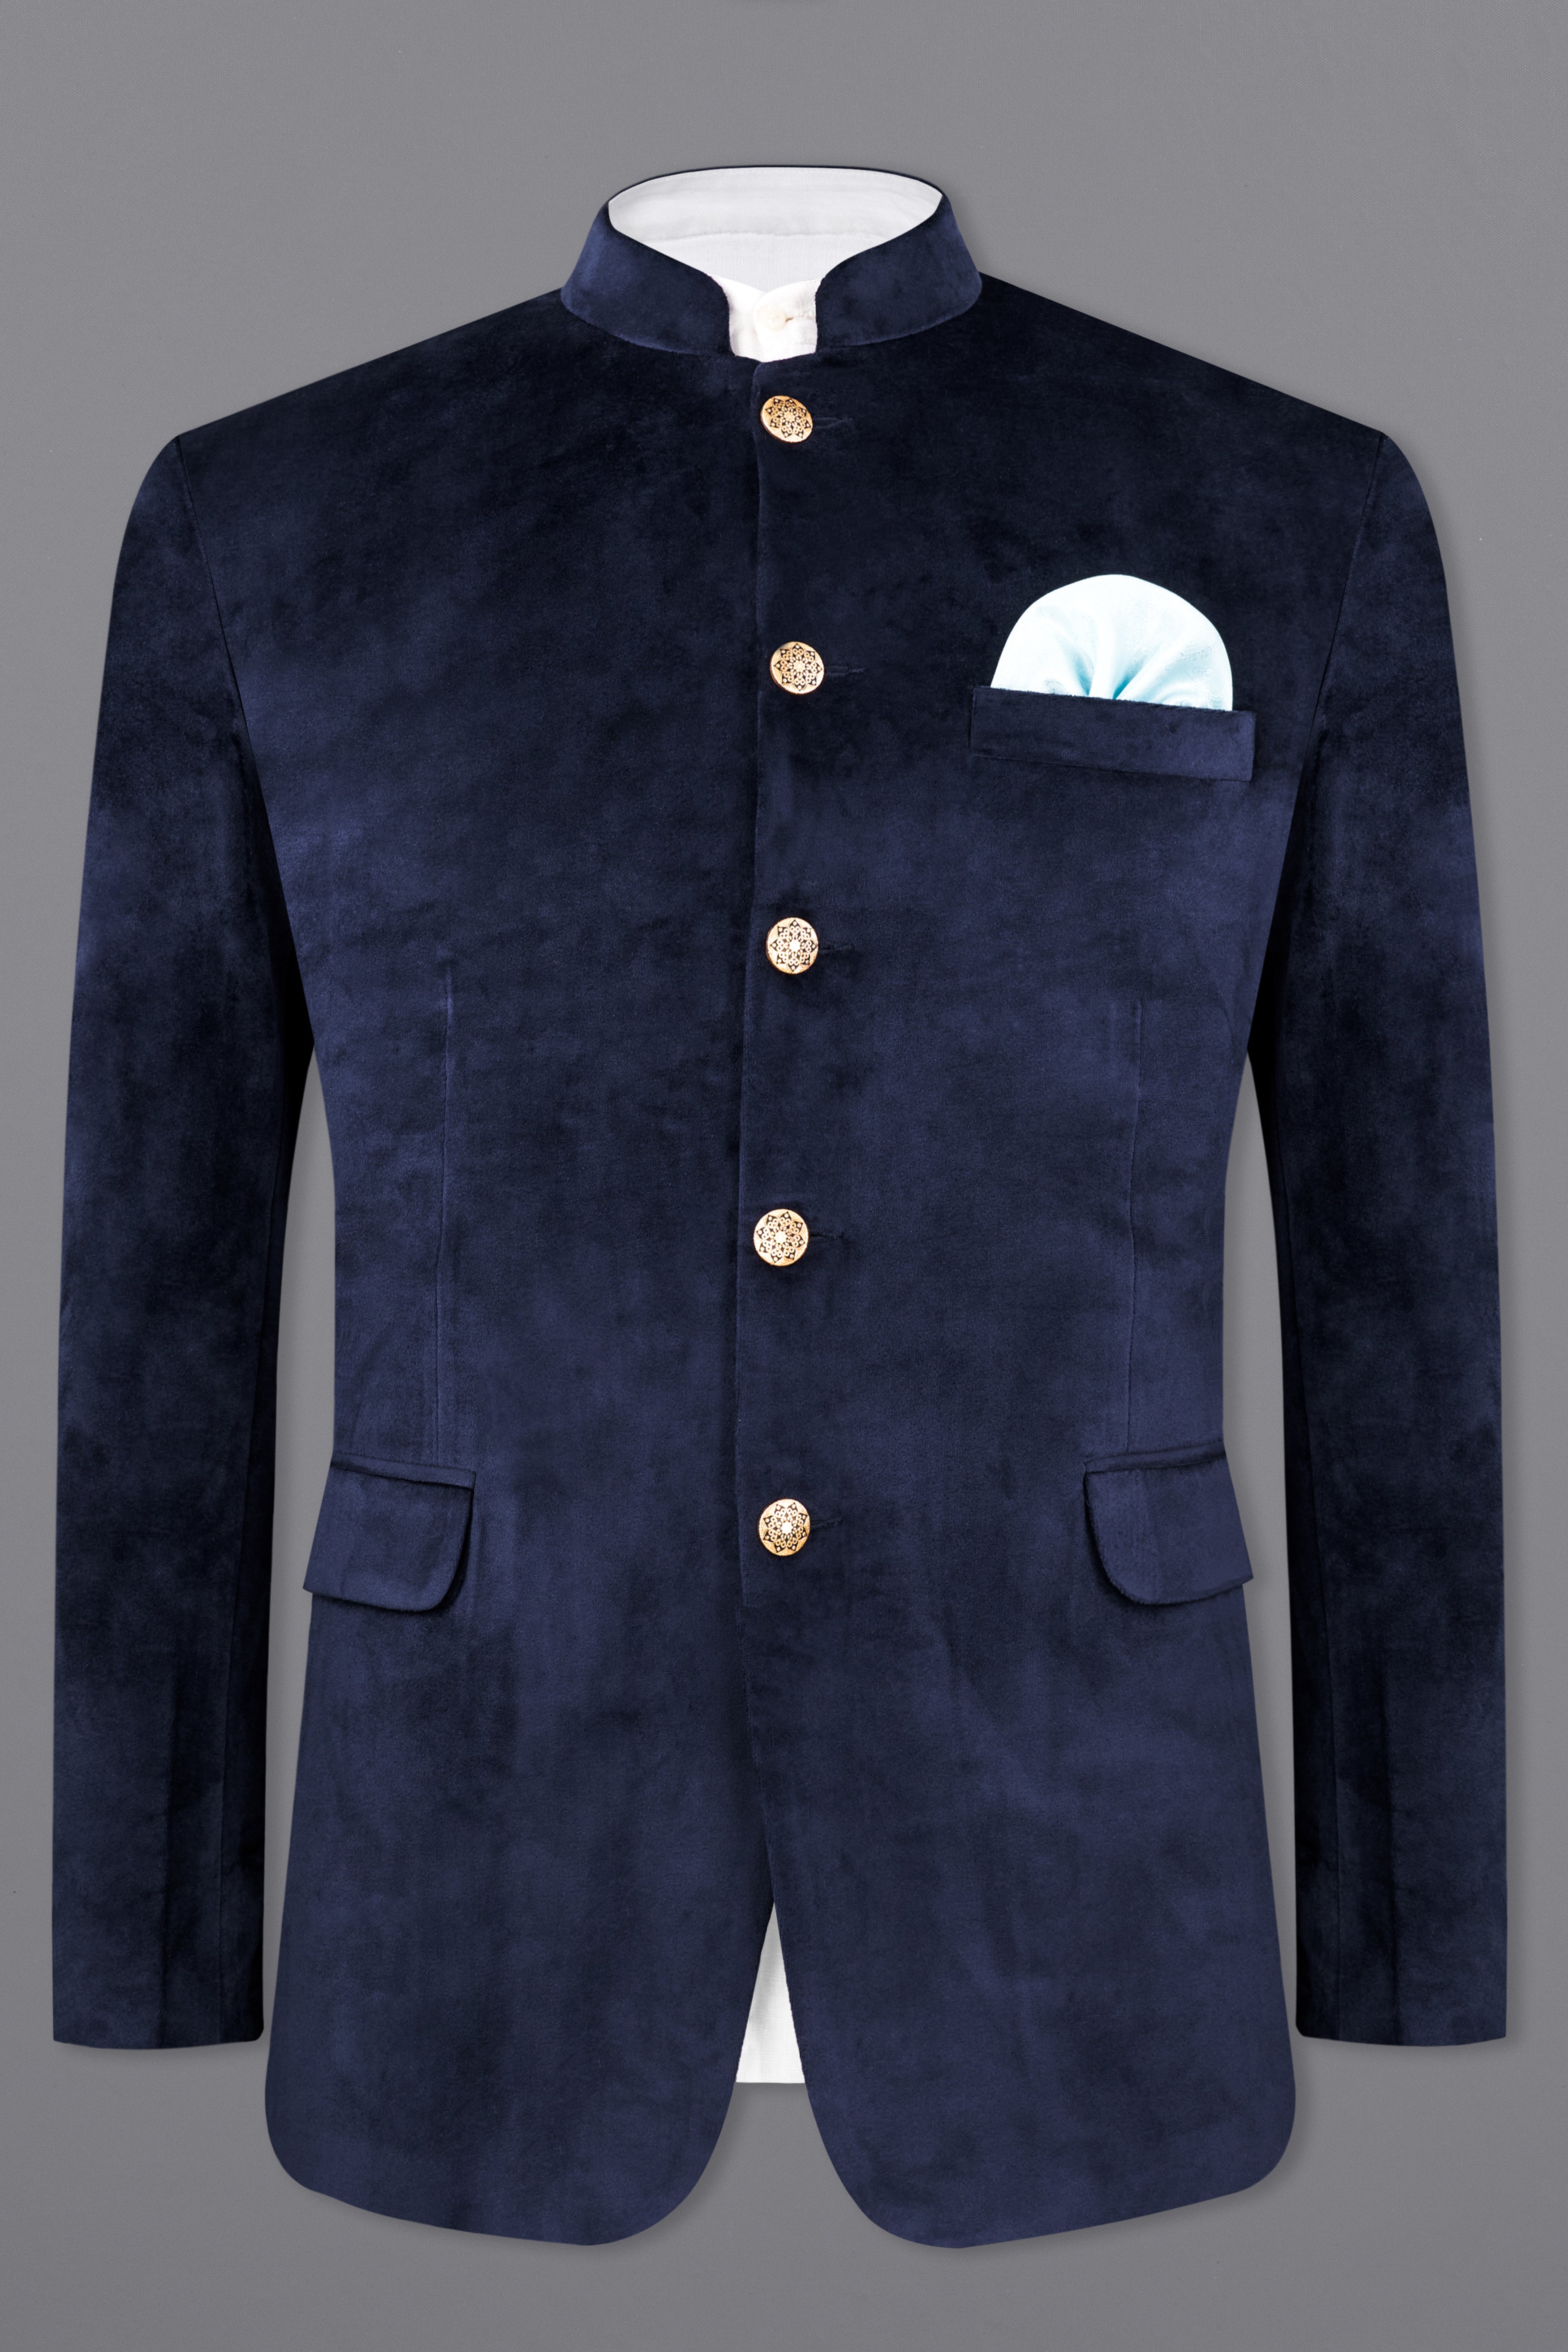 Shop Blue Blazers Collections For Men in India - French Crown